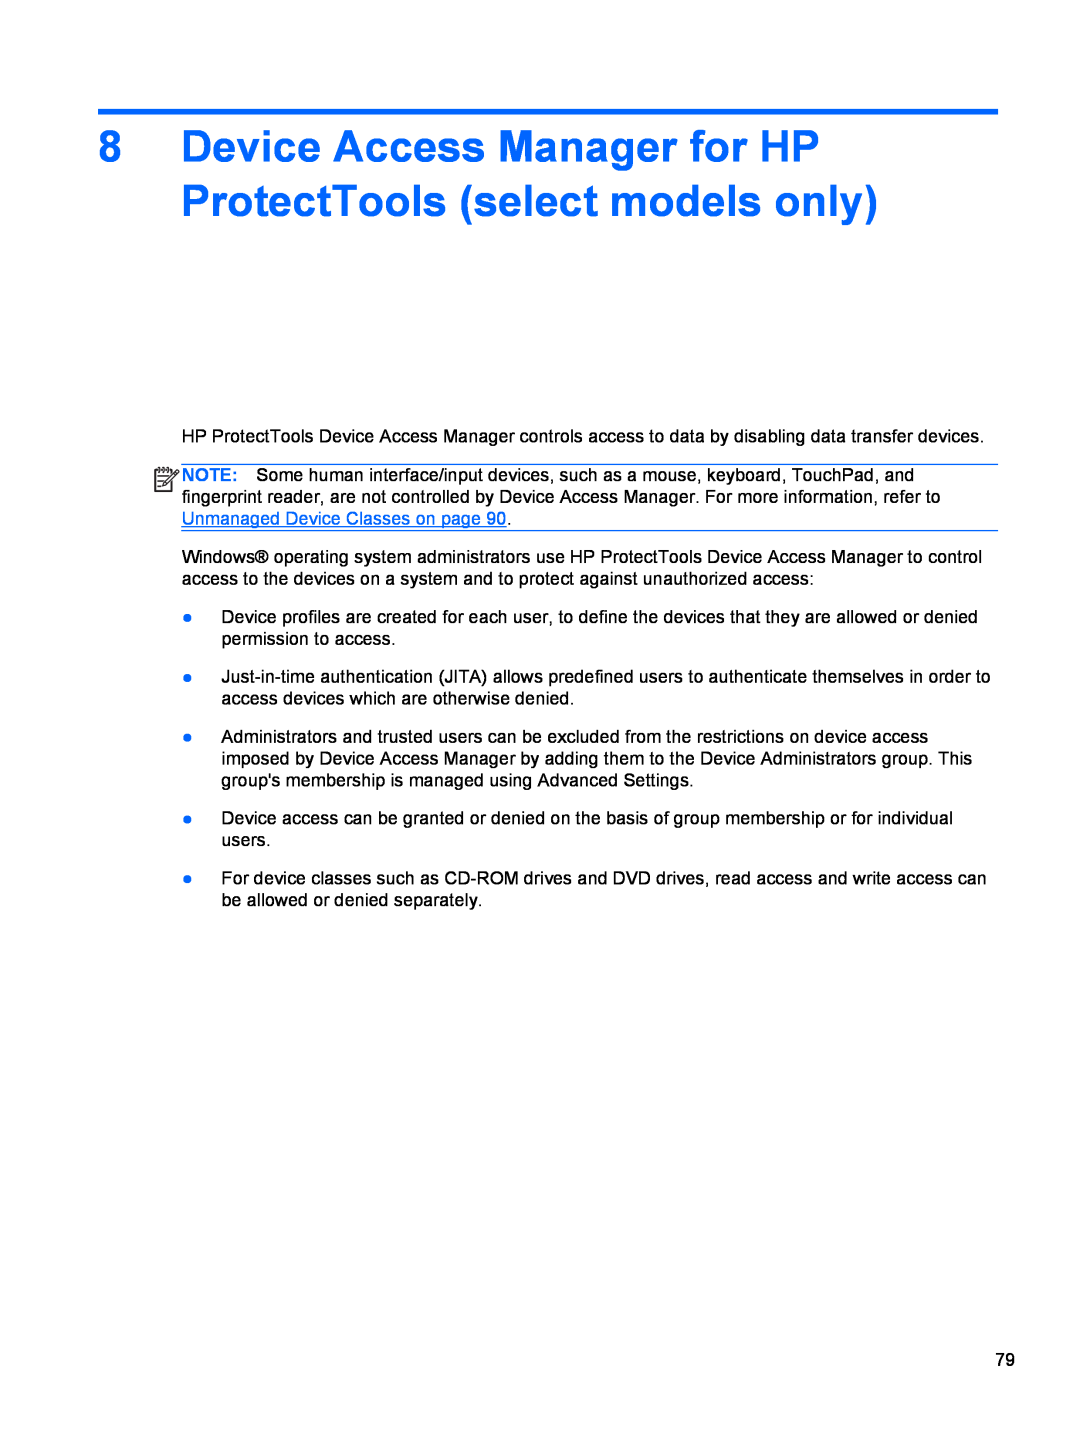 HP 2 Base Model manual Device Access Manager for HP ProtectTools select models only 